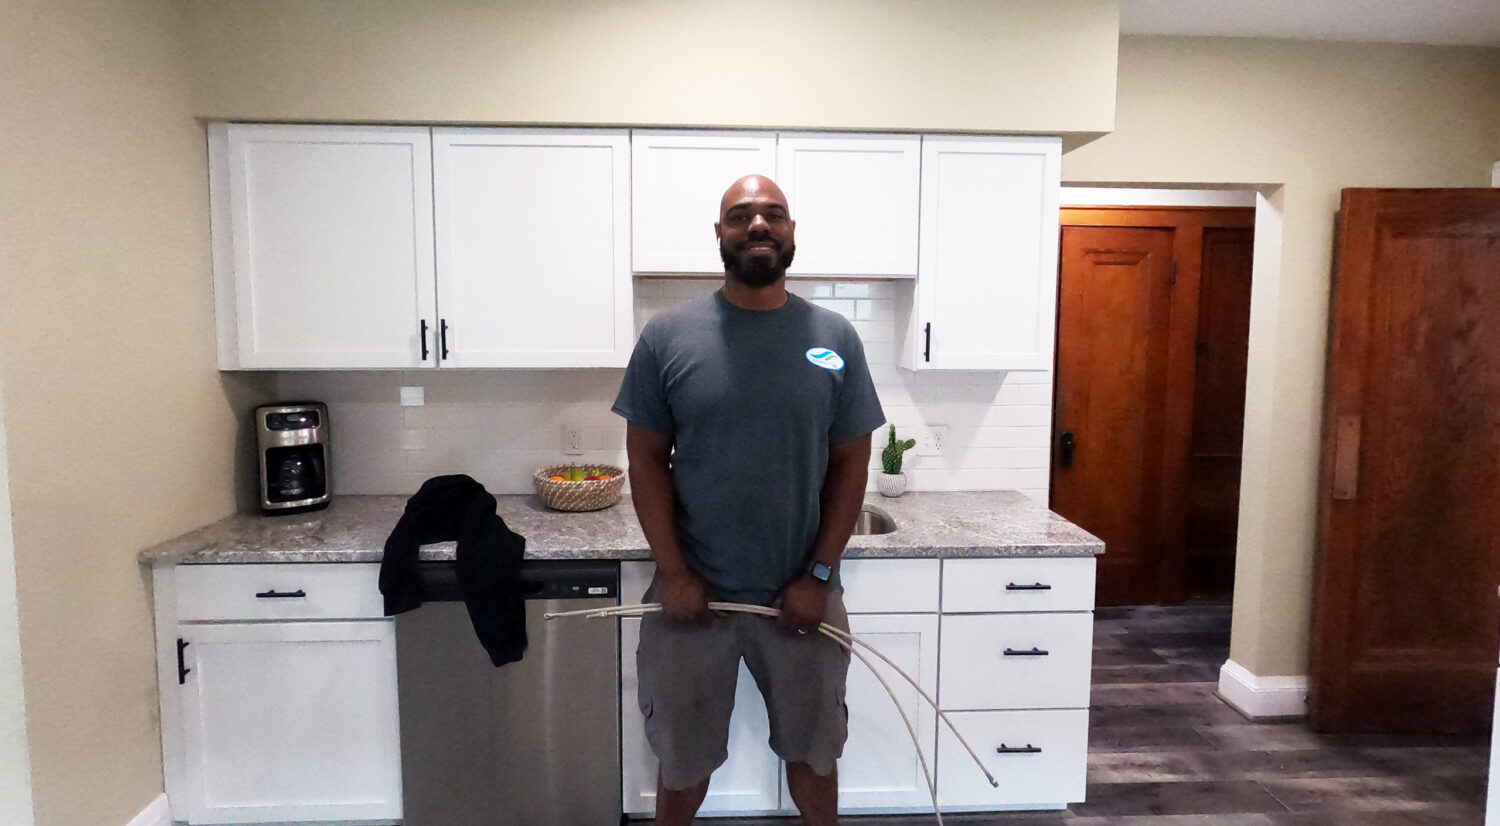 Owner Operator, James Green standing in front of kitchen cabinets, smiling and holding an air duct cleaning tool.